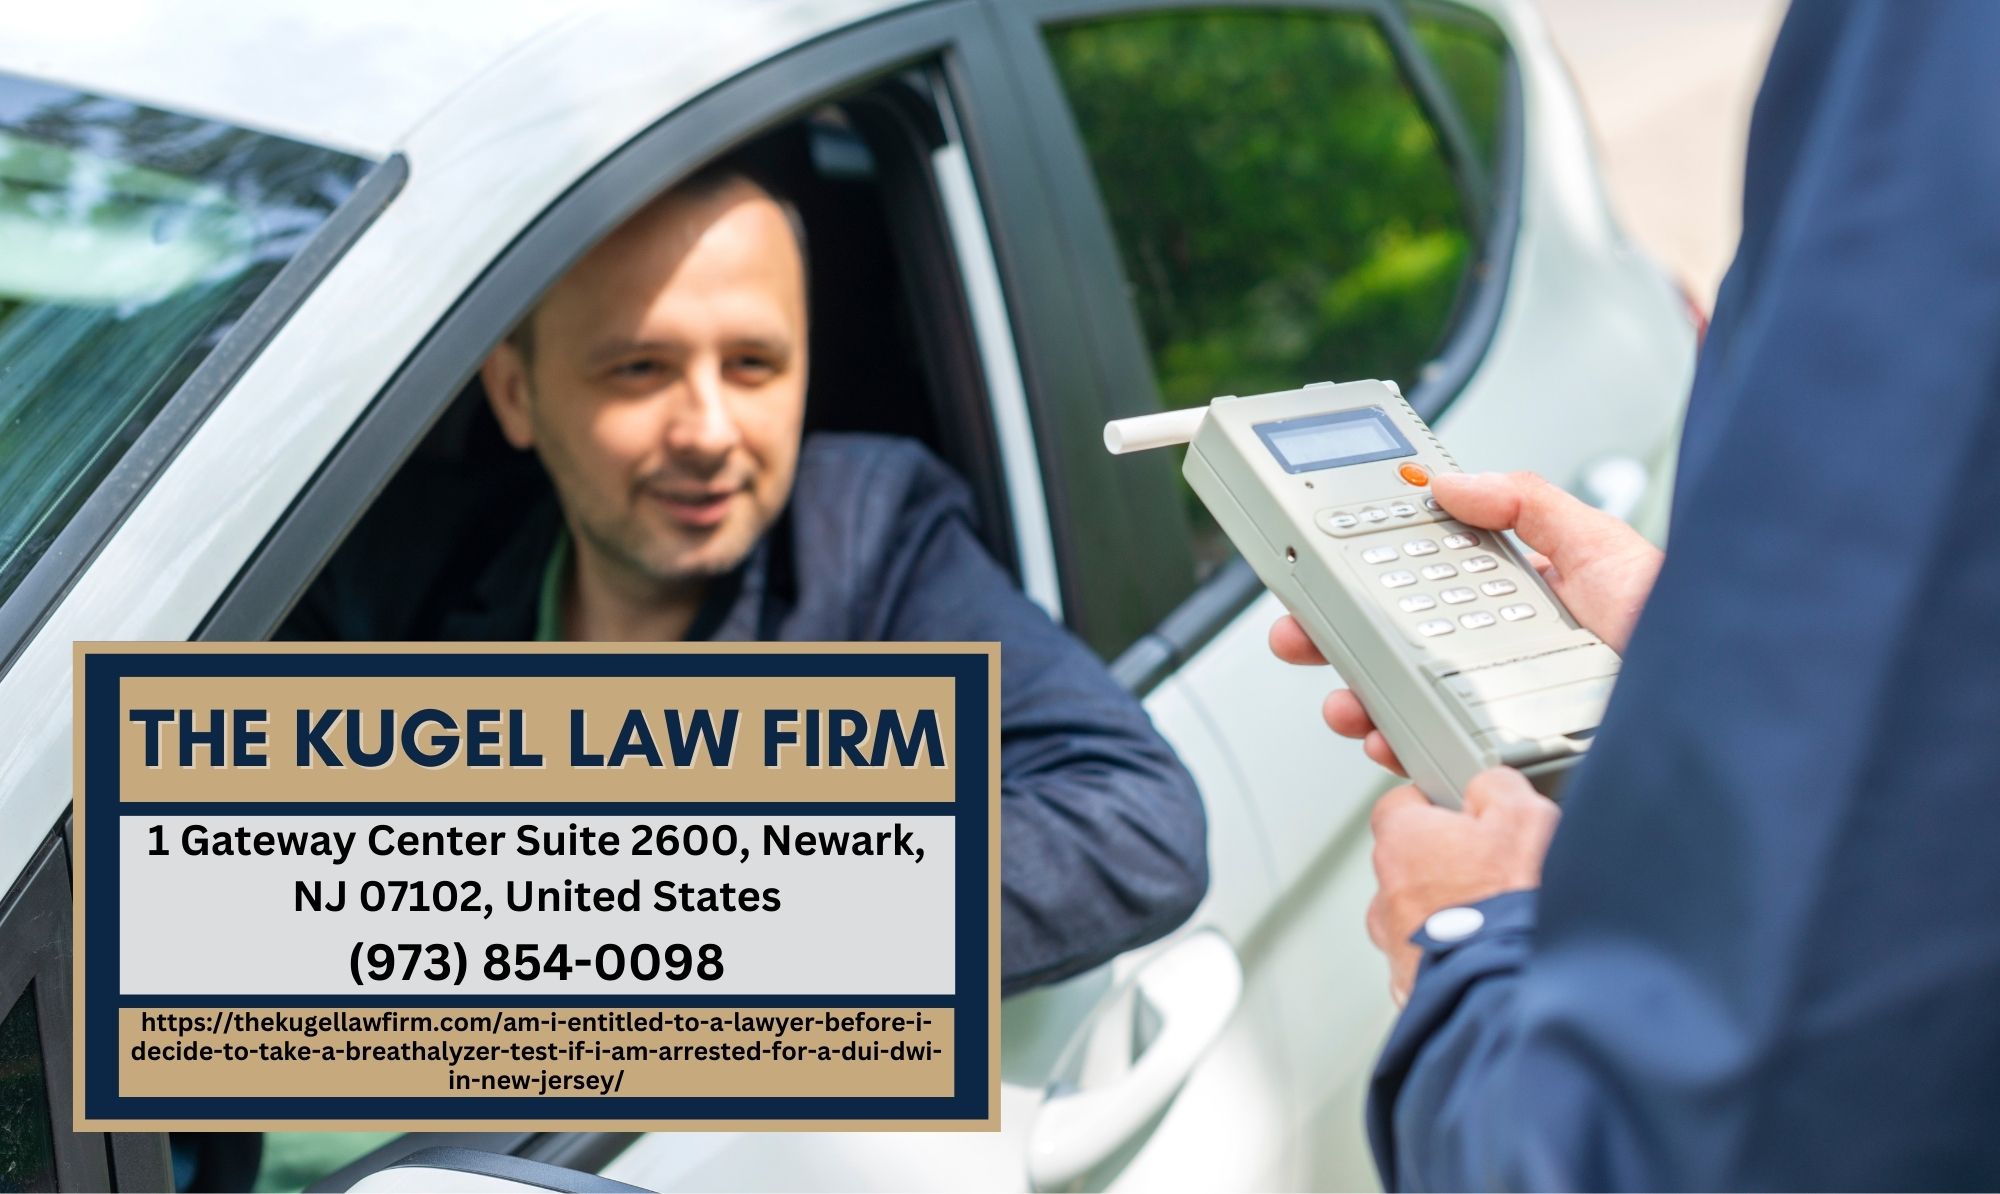 New Jersey DUI Attorney Rachel Kugel Releases Article on Breathalyzer Test Rights